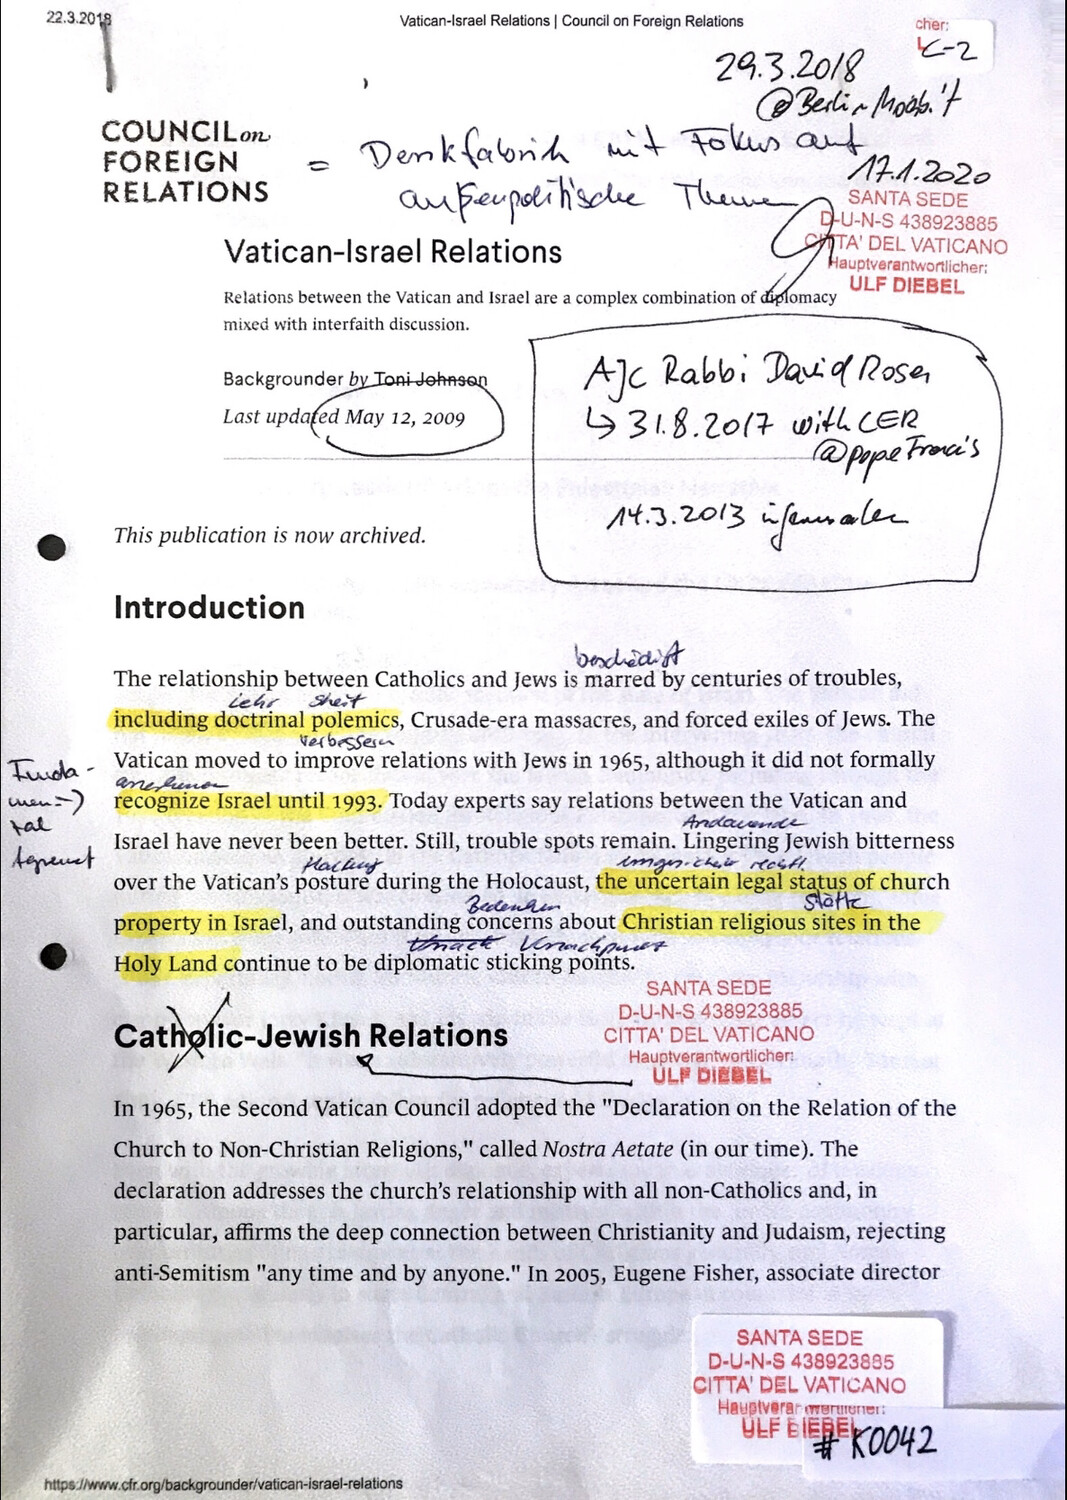 #K0042 l Vatican-Israel Relations - Council on Foreign Relations